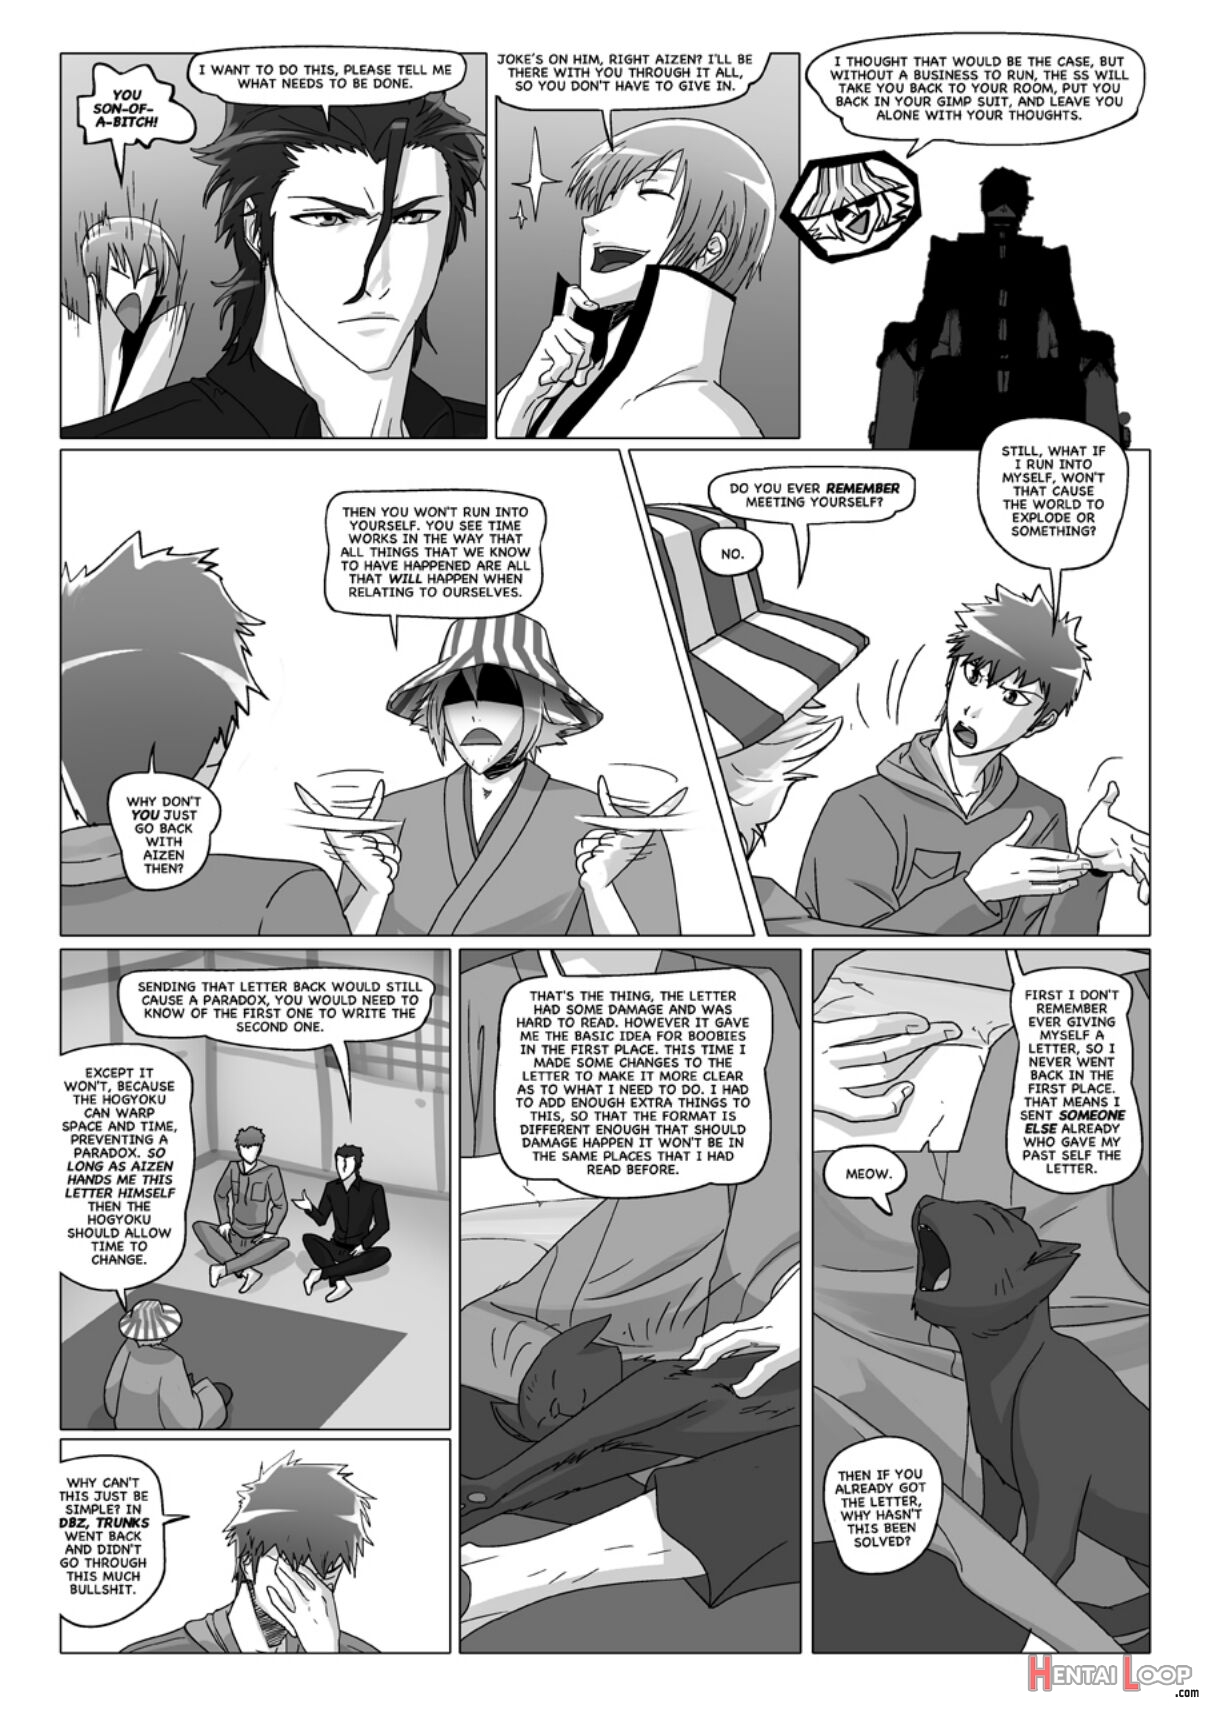 Happy To Serve You - Xxx Version page 307